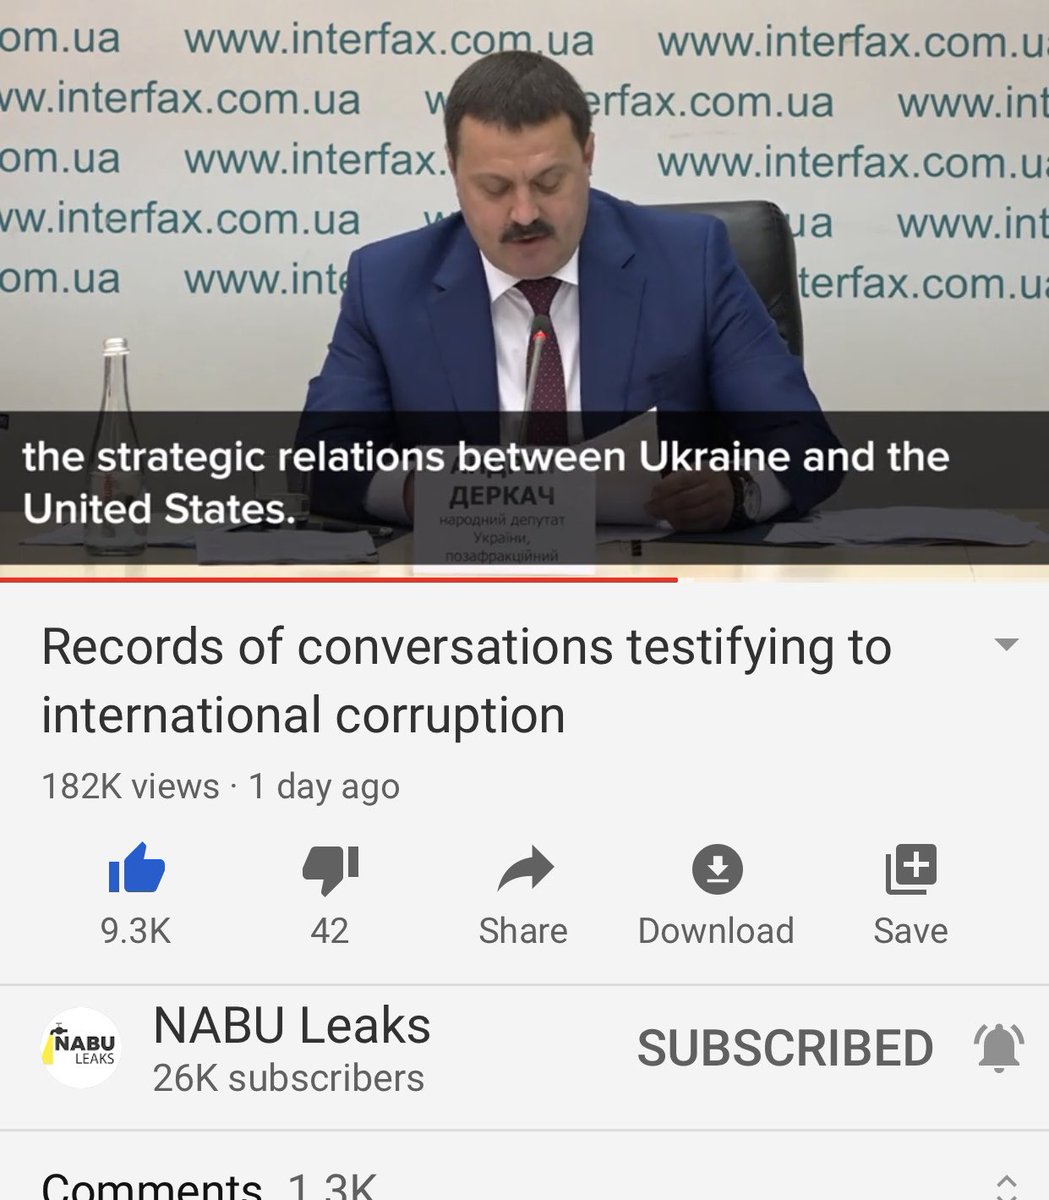 He then stated that the corruption is multiplying and they’re creating a larger anti corruption platform to investigate these facts to ensure the US & Ukraine relations are preserved and next he’s detailing how large the corruption network is